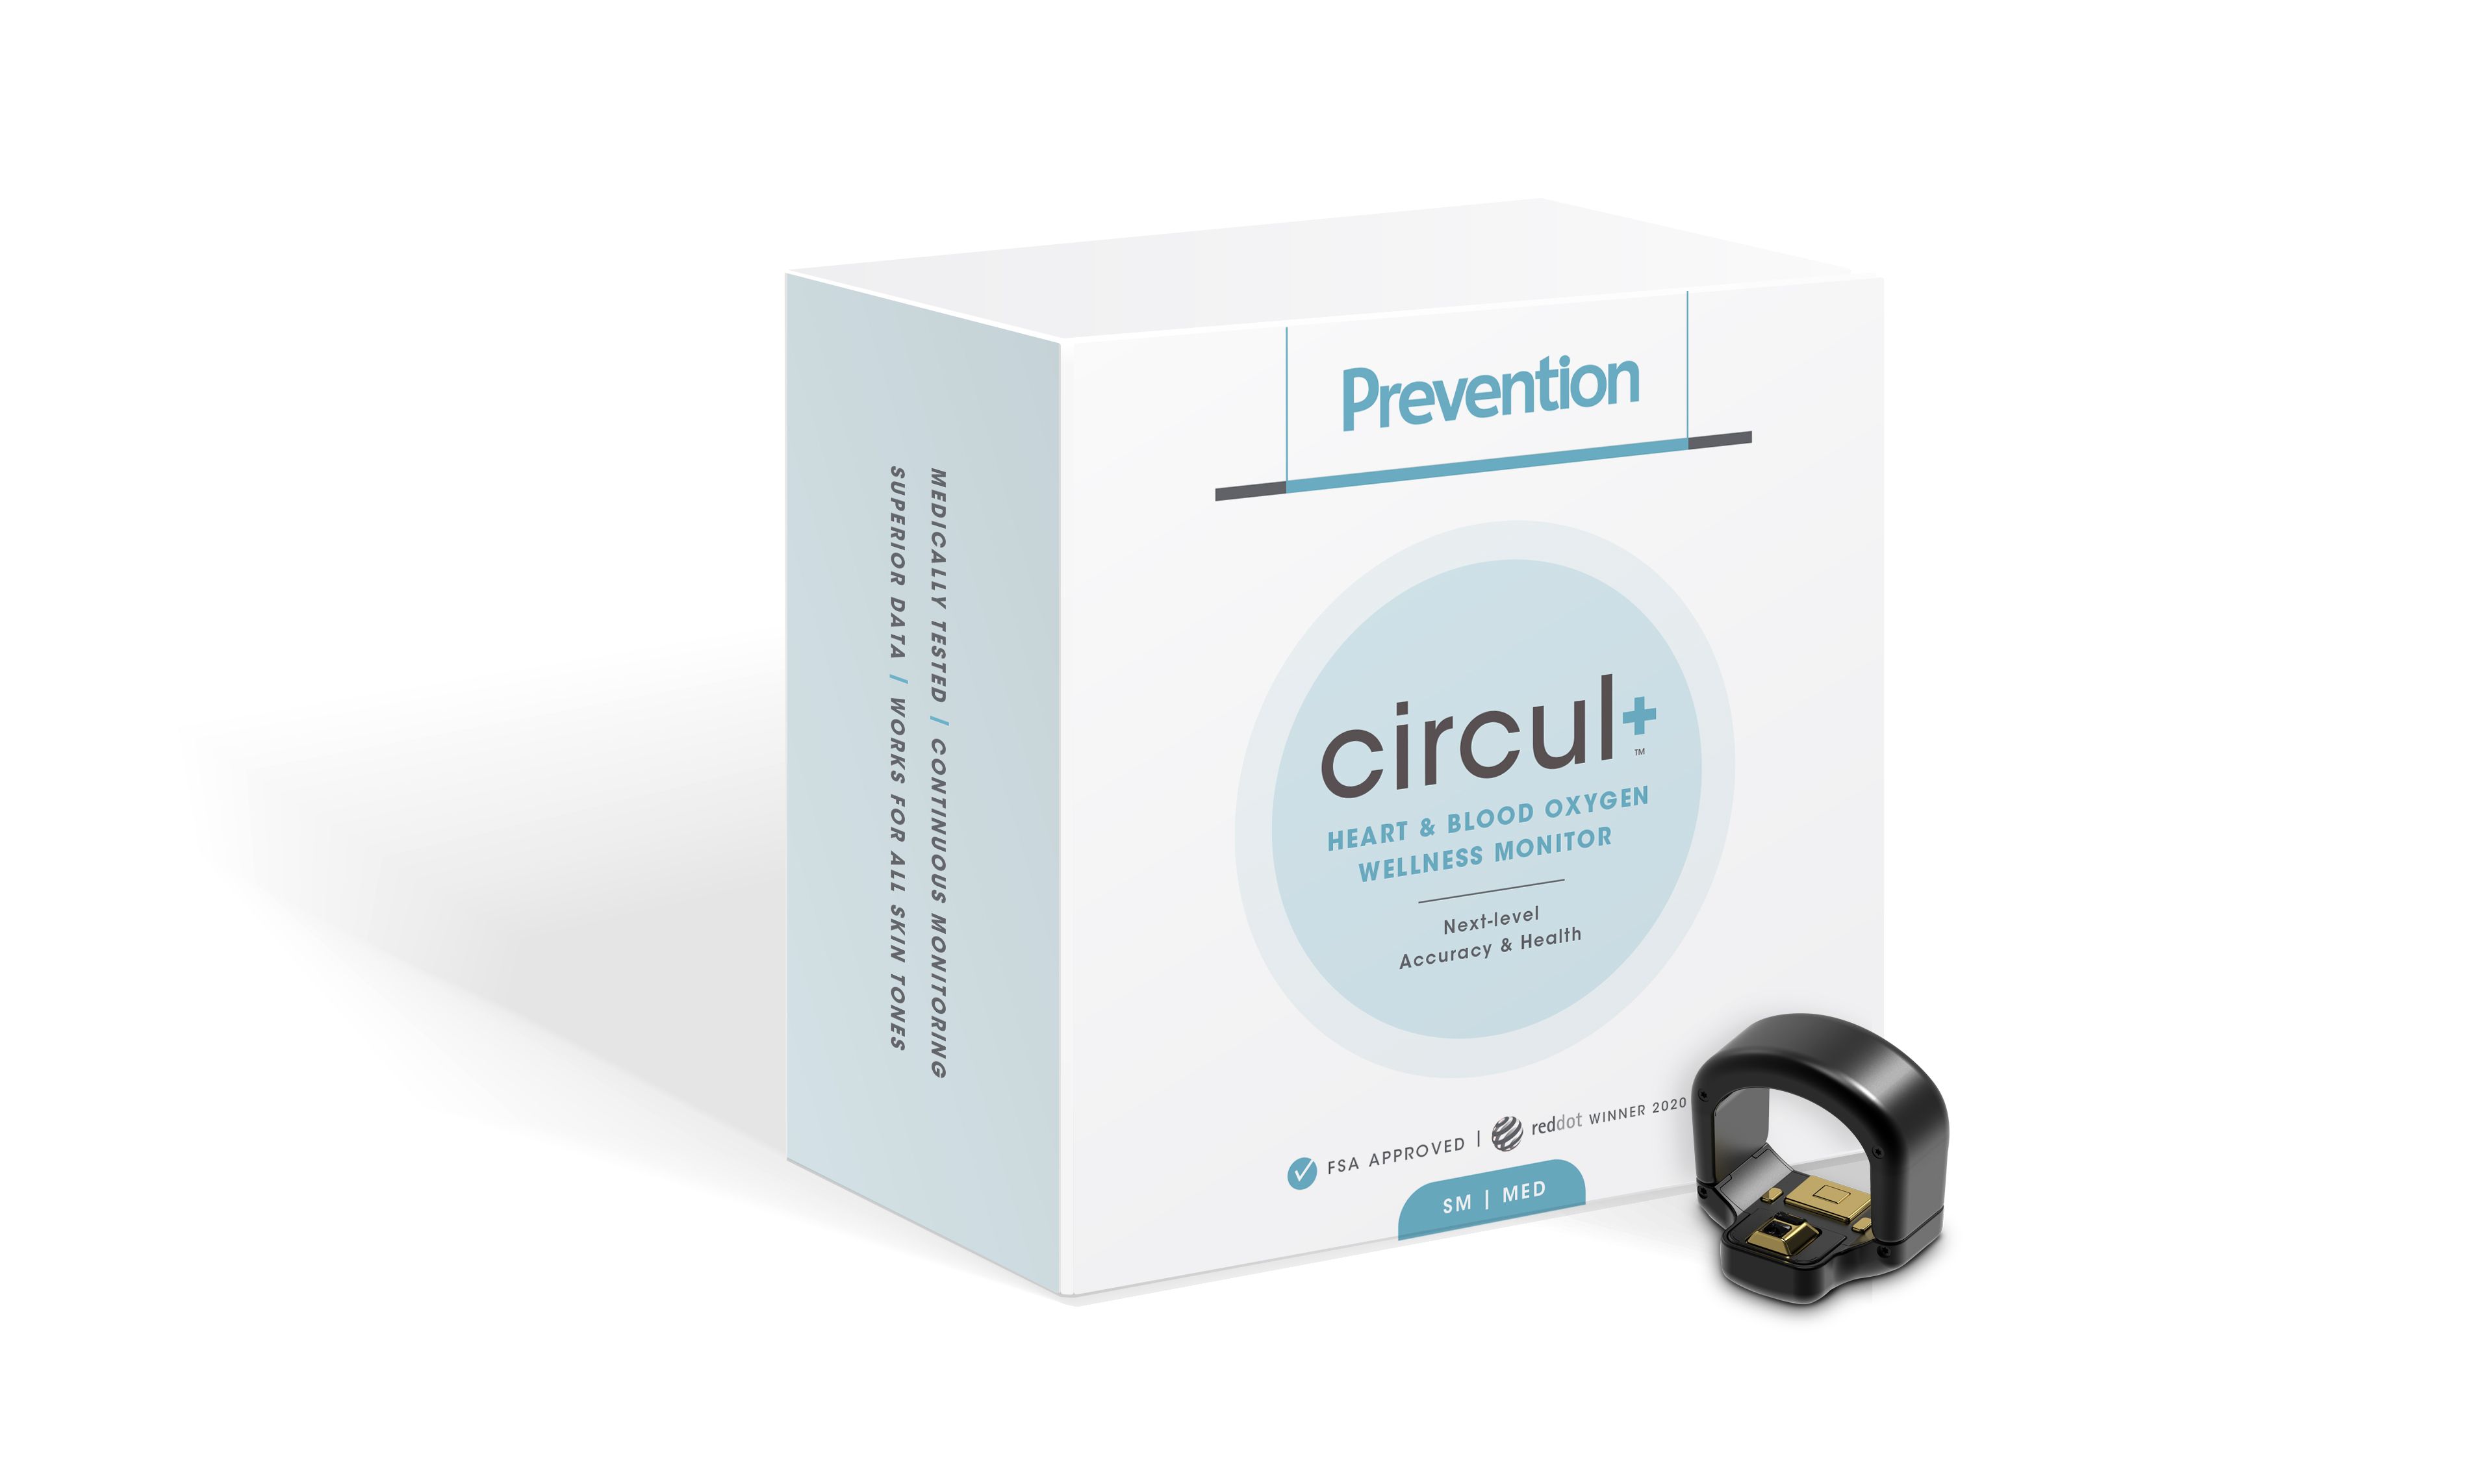 Prevention Circul+ Smart Ring Related Information